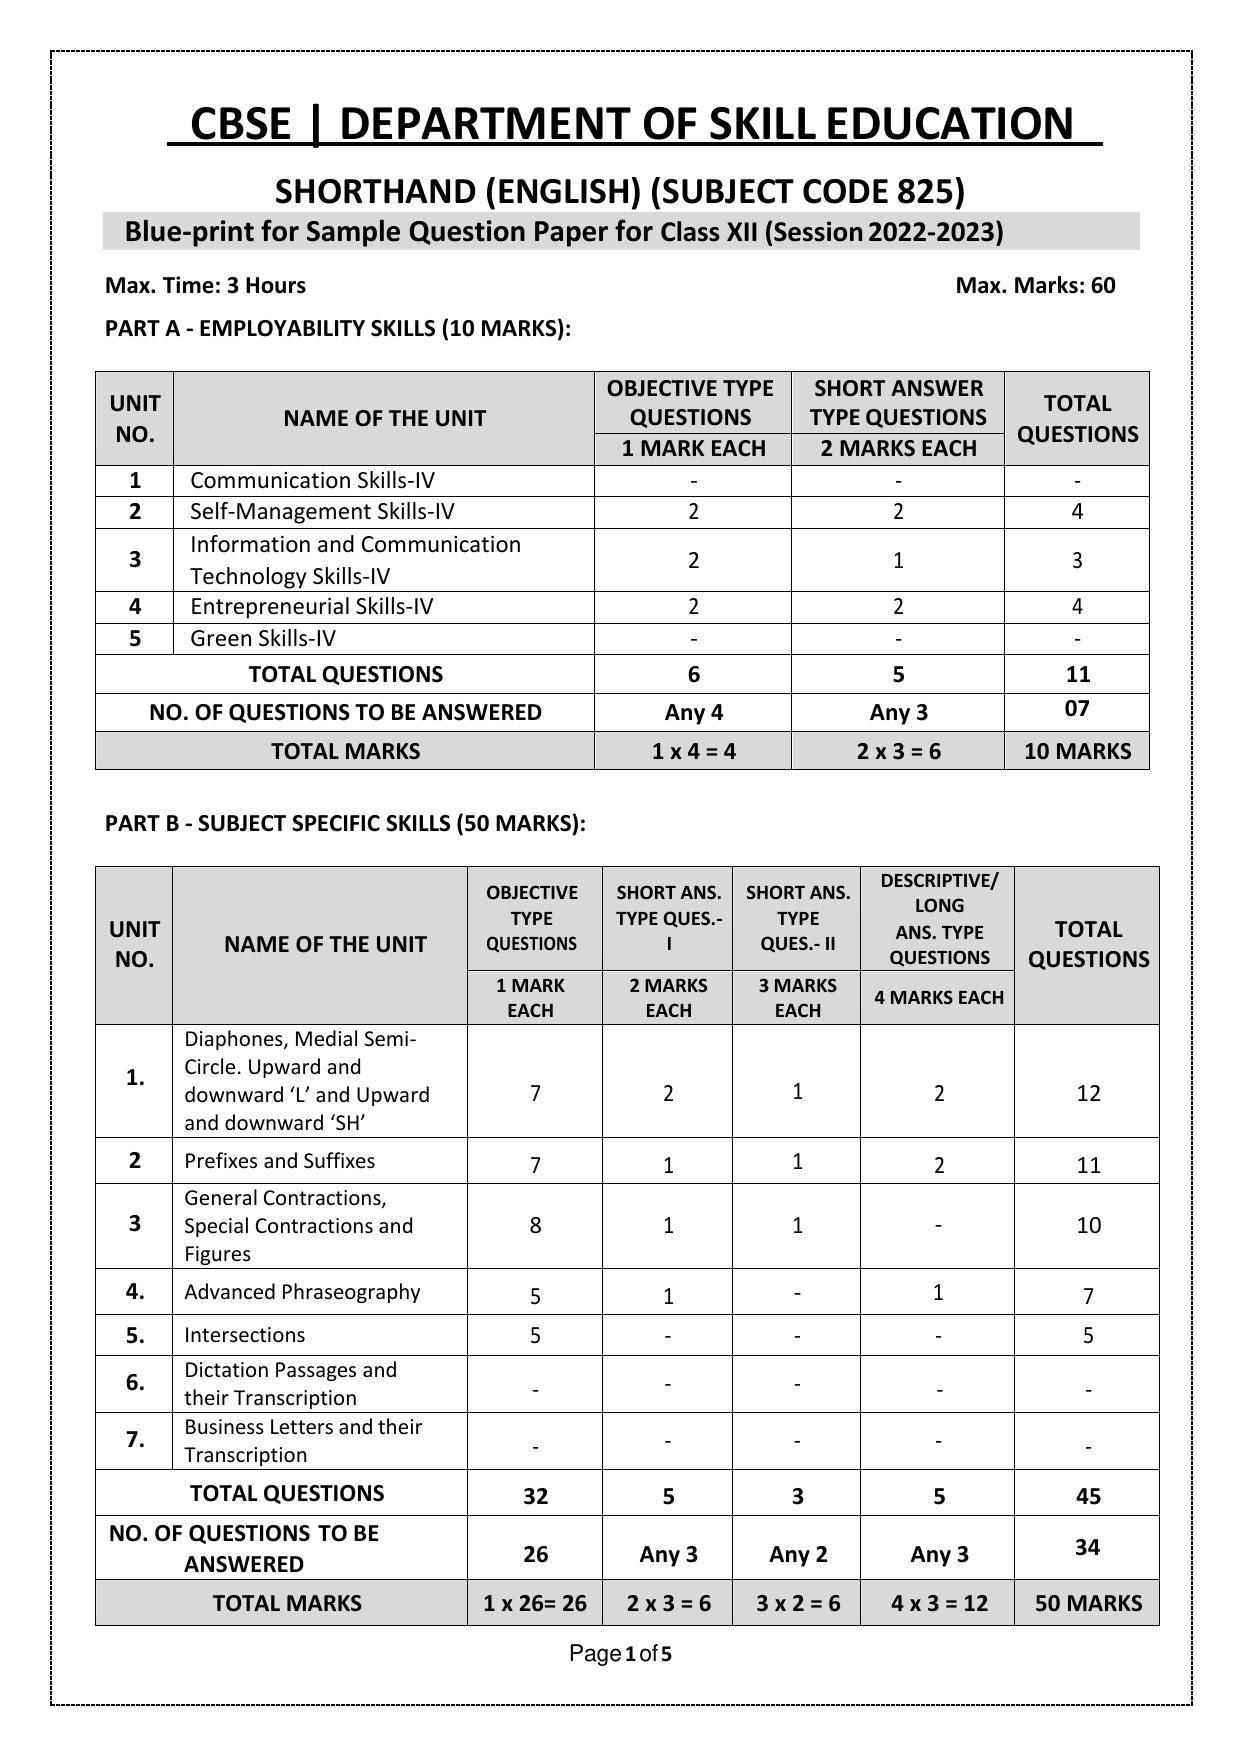 CBSE Class 12 Shorthand (English) (Skill Education) Sample Papers 2023 - Page 1